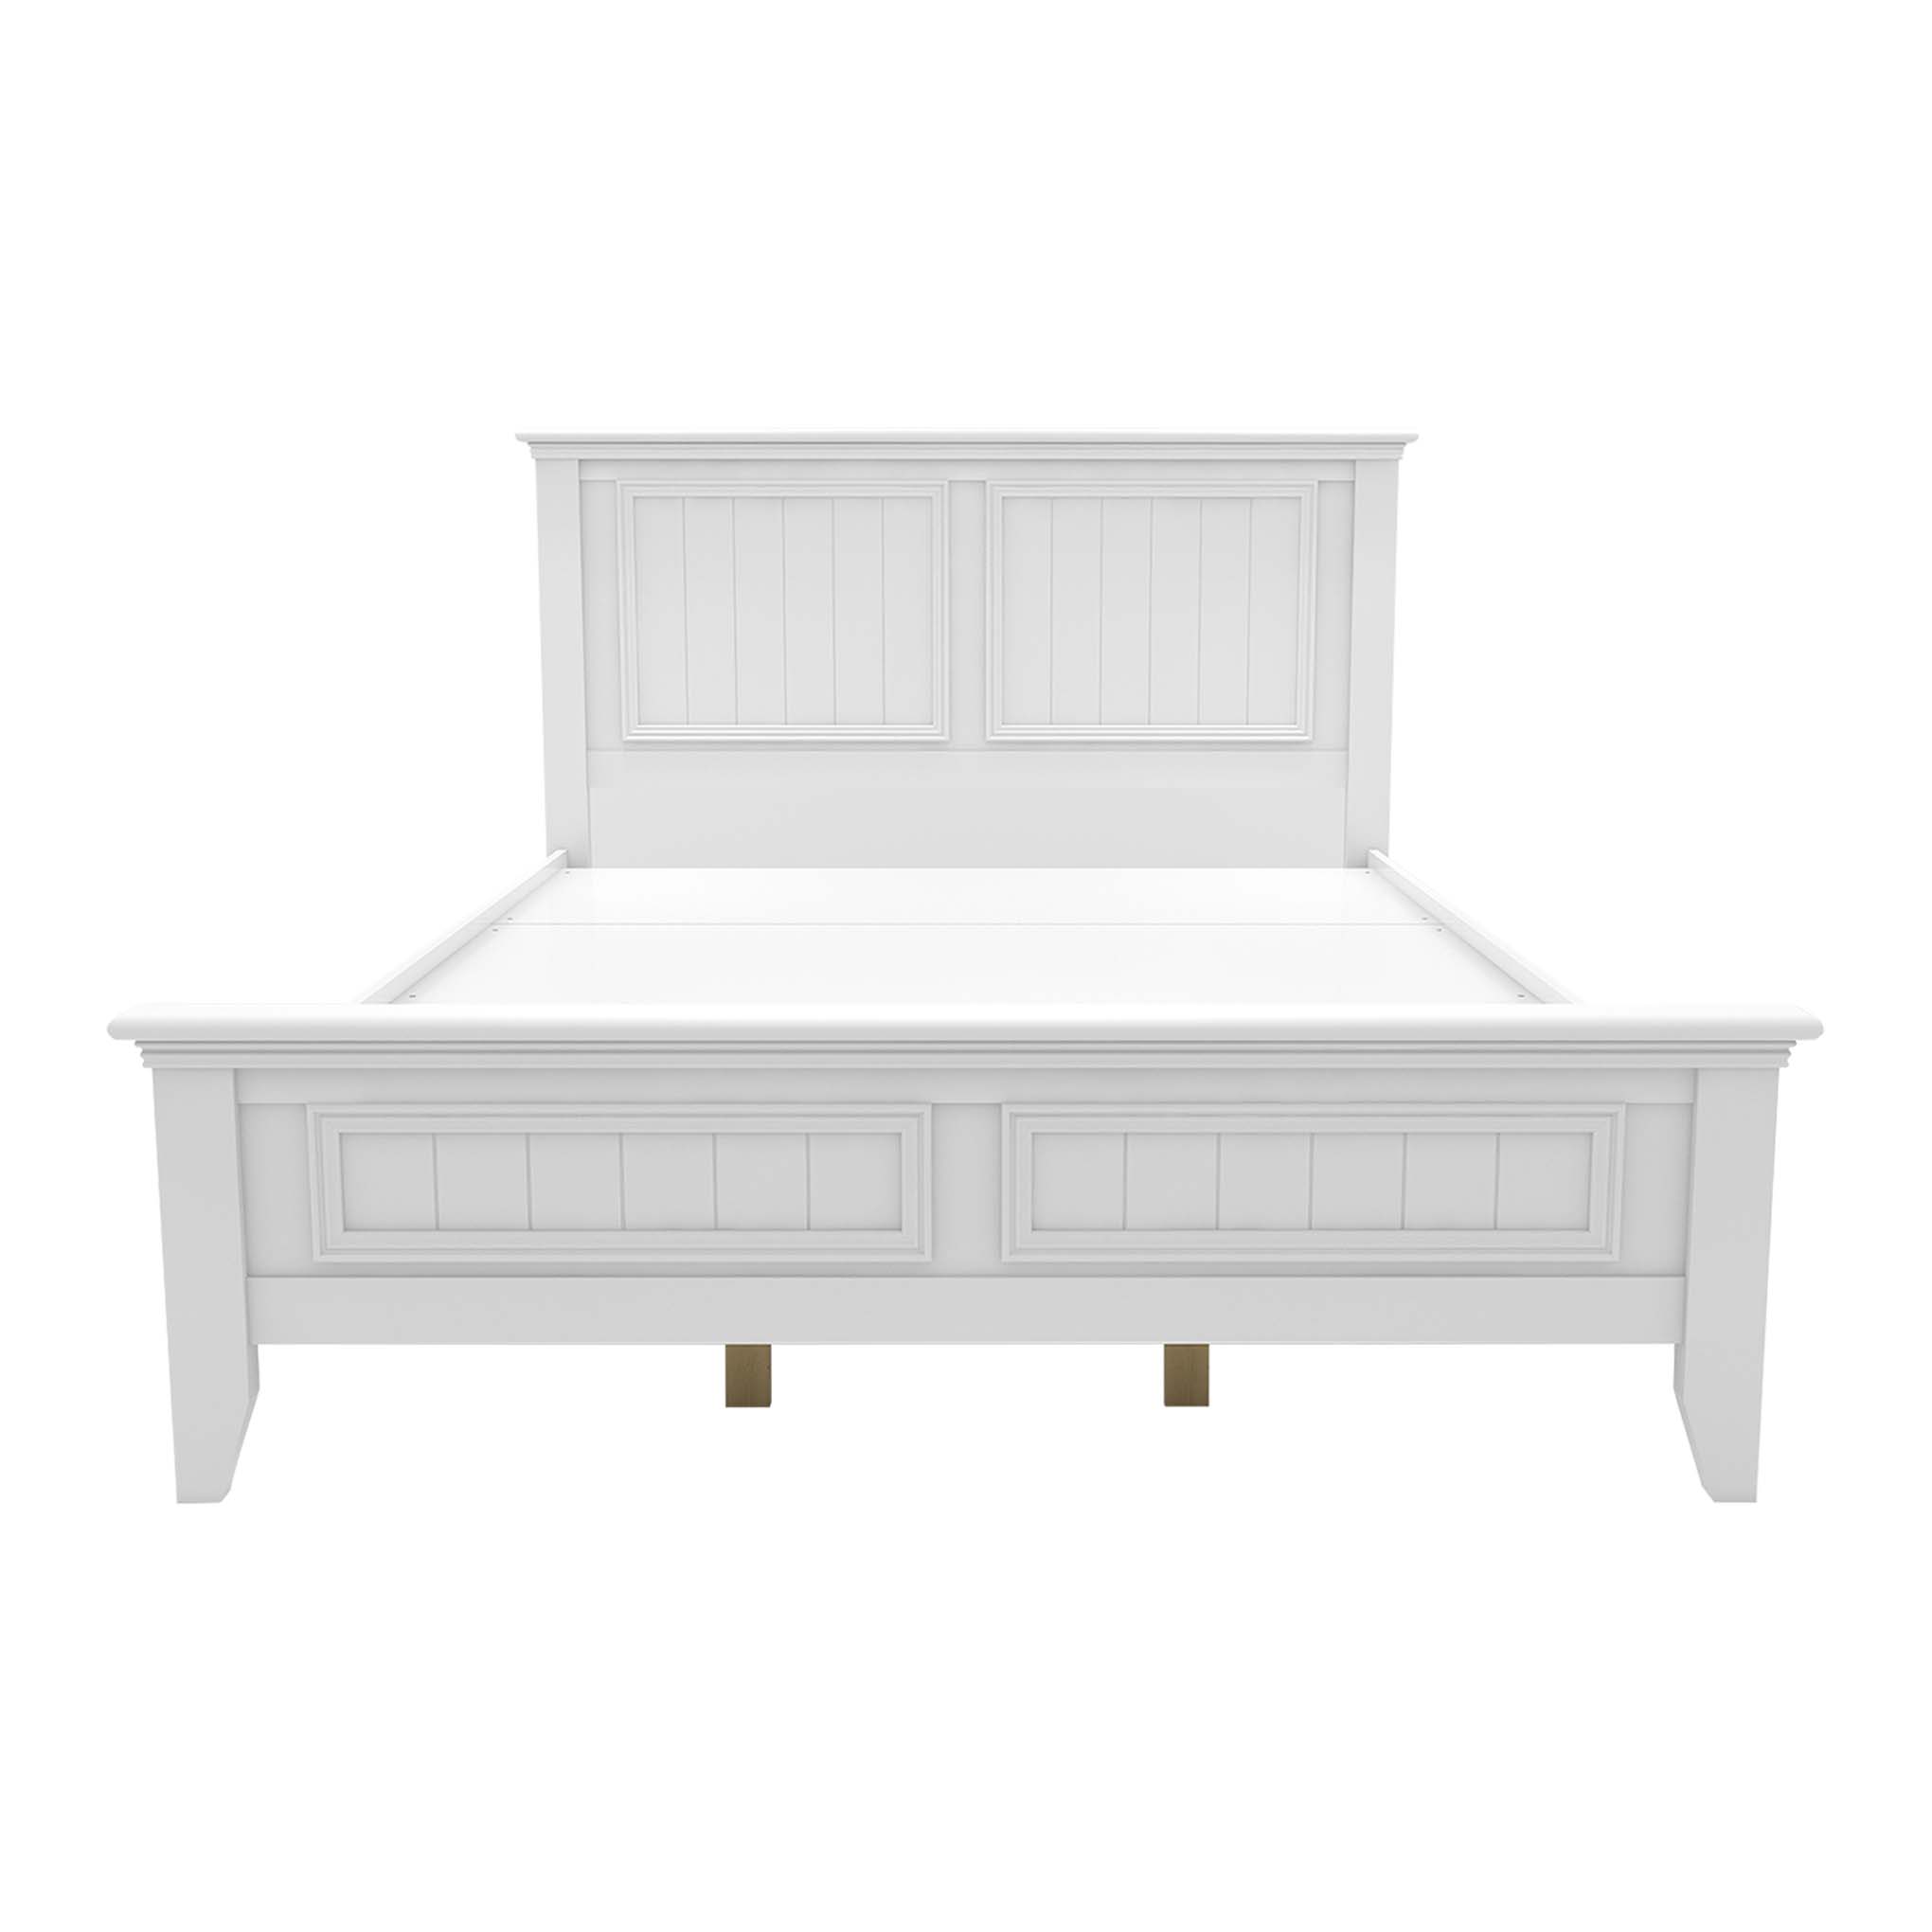 <b>Bolivar King/Queen Bed</b><br>King : L2016 X W1990 X H1200 MM<br>Queen : L2016 X W1685 X H1200 MM